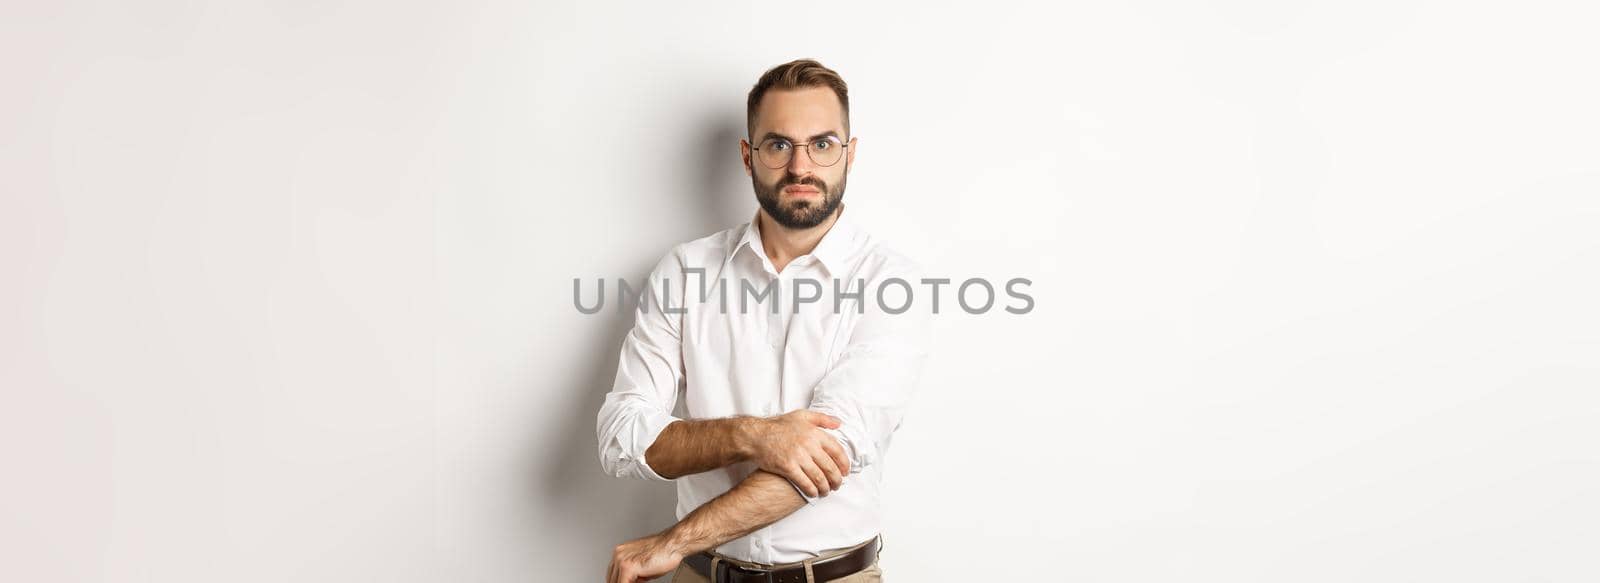 Angry man roll up sleeves and looking offended, getting ready to fight, standing over white background.